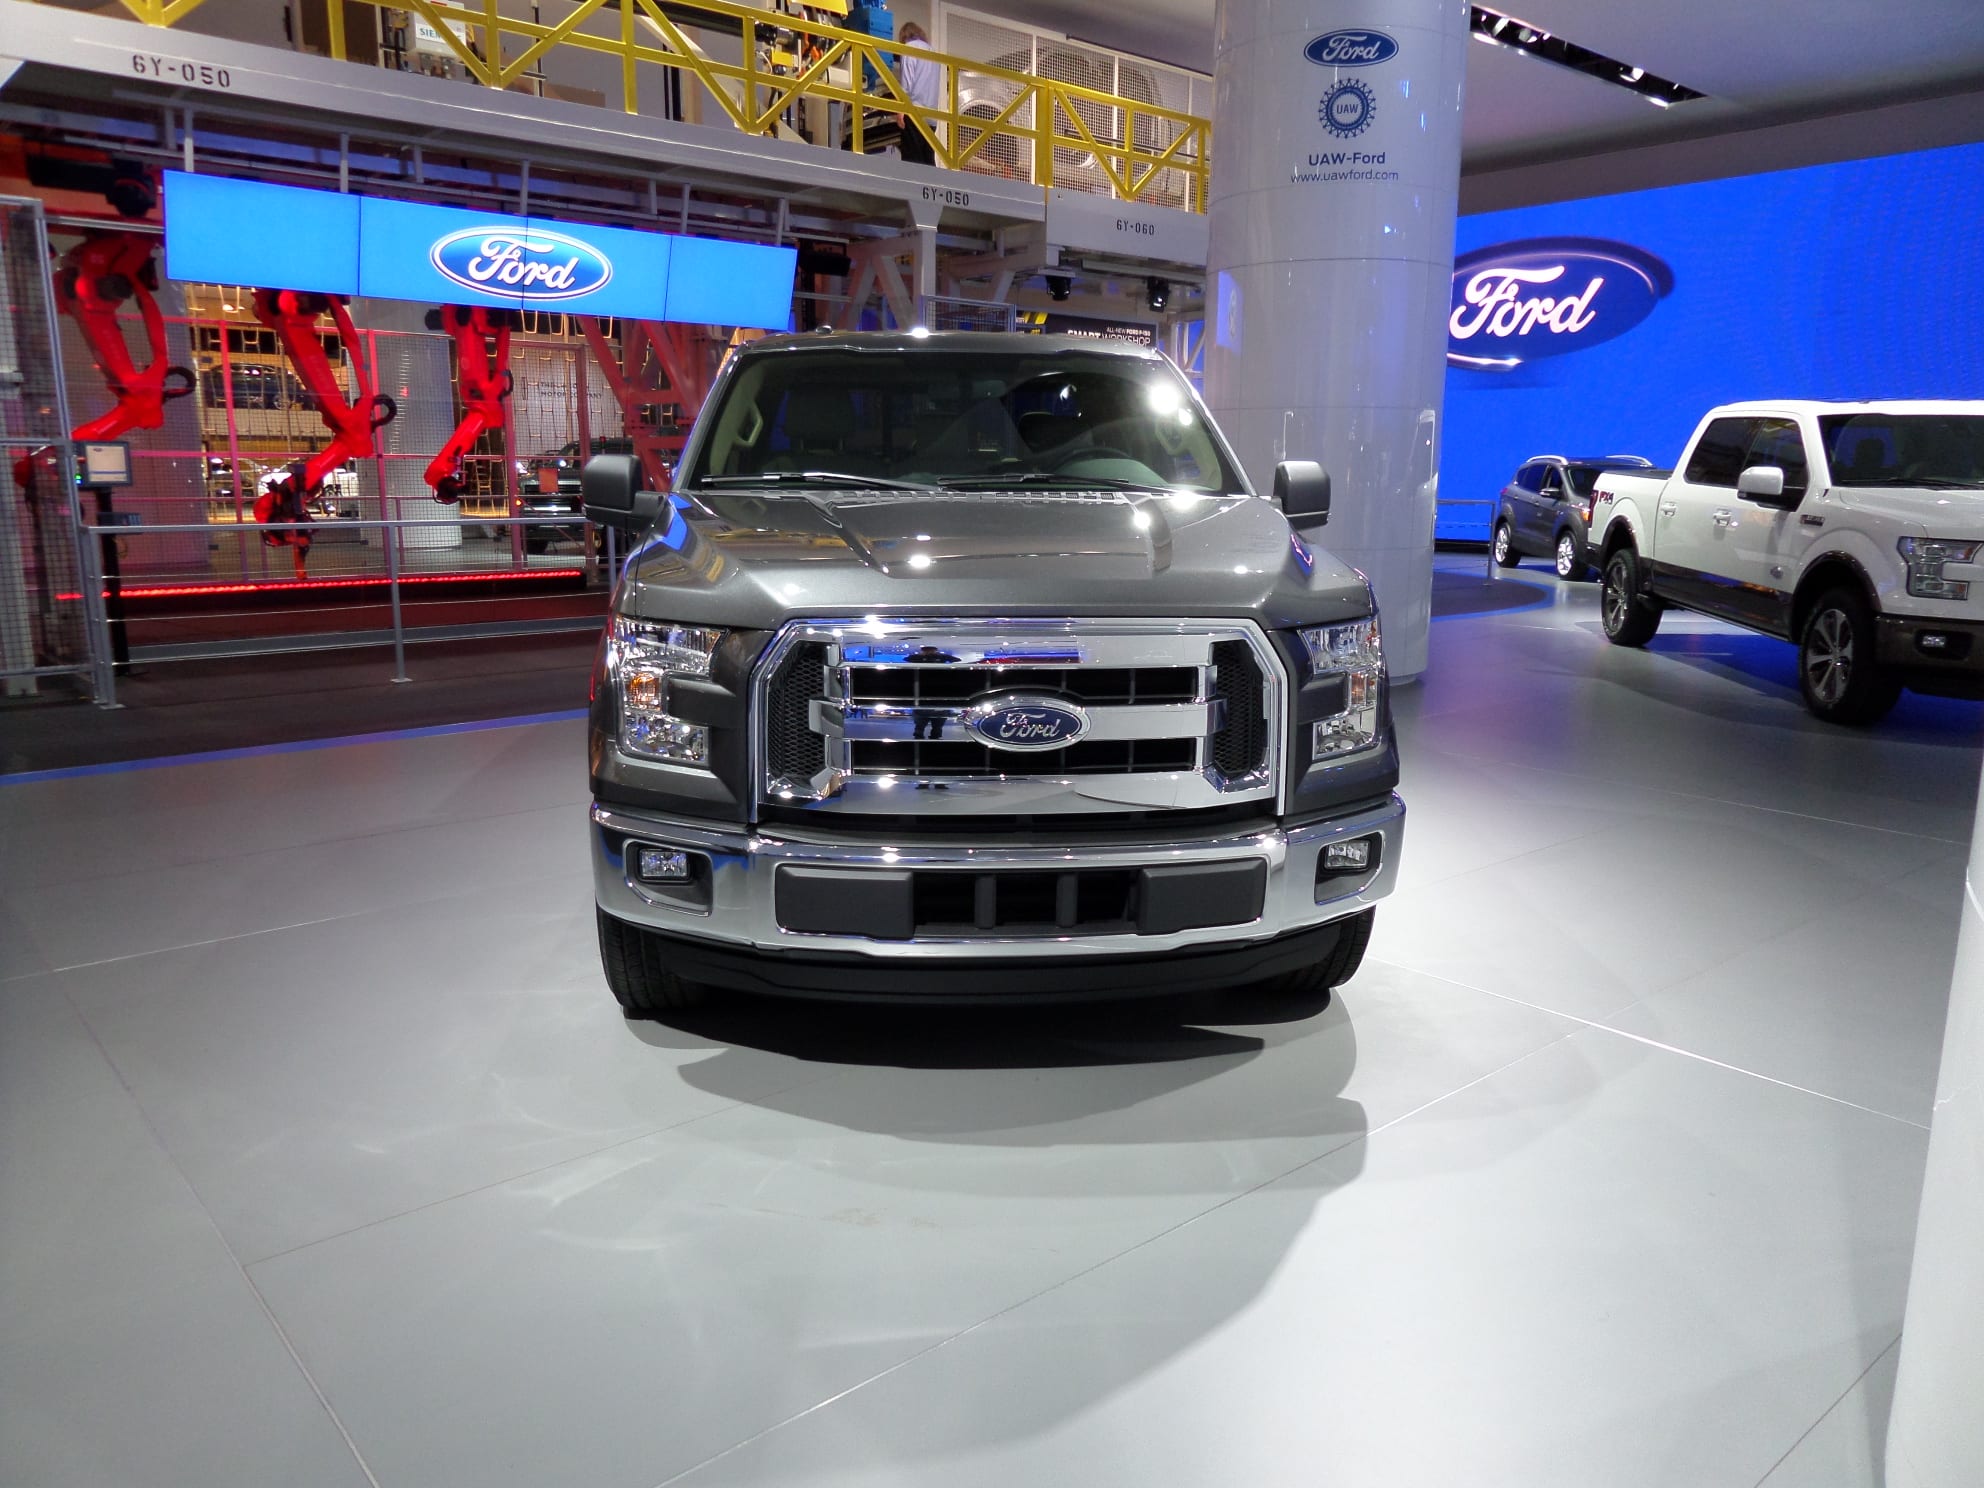 Grey 2015 Ford F-150 - Front view.